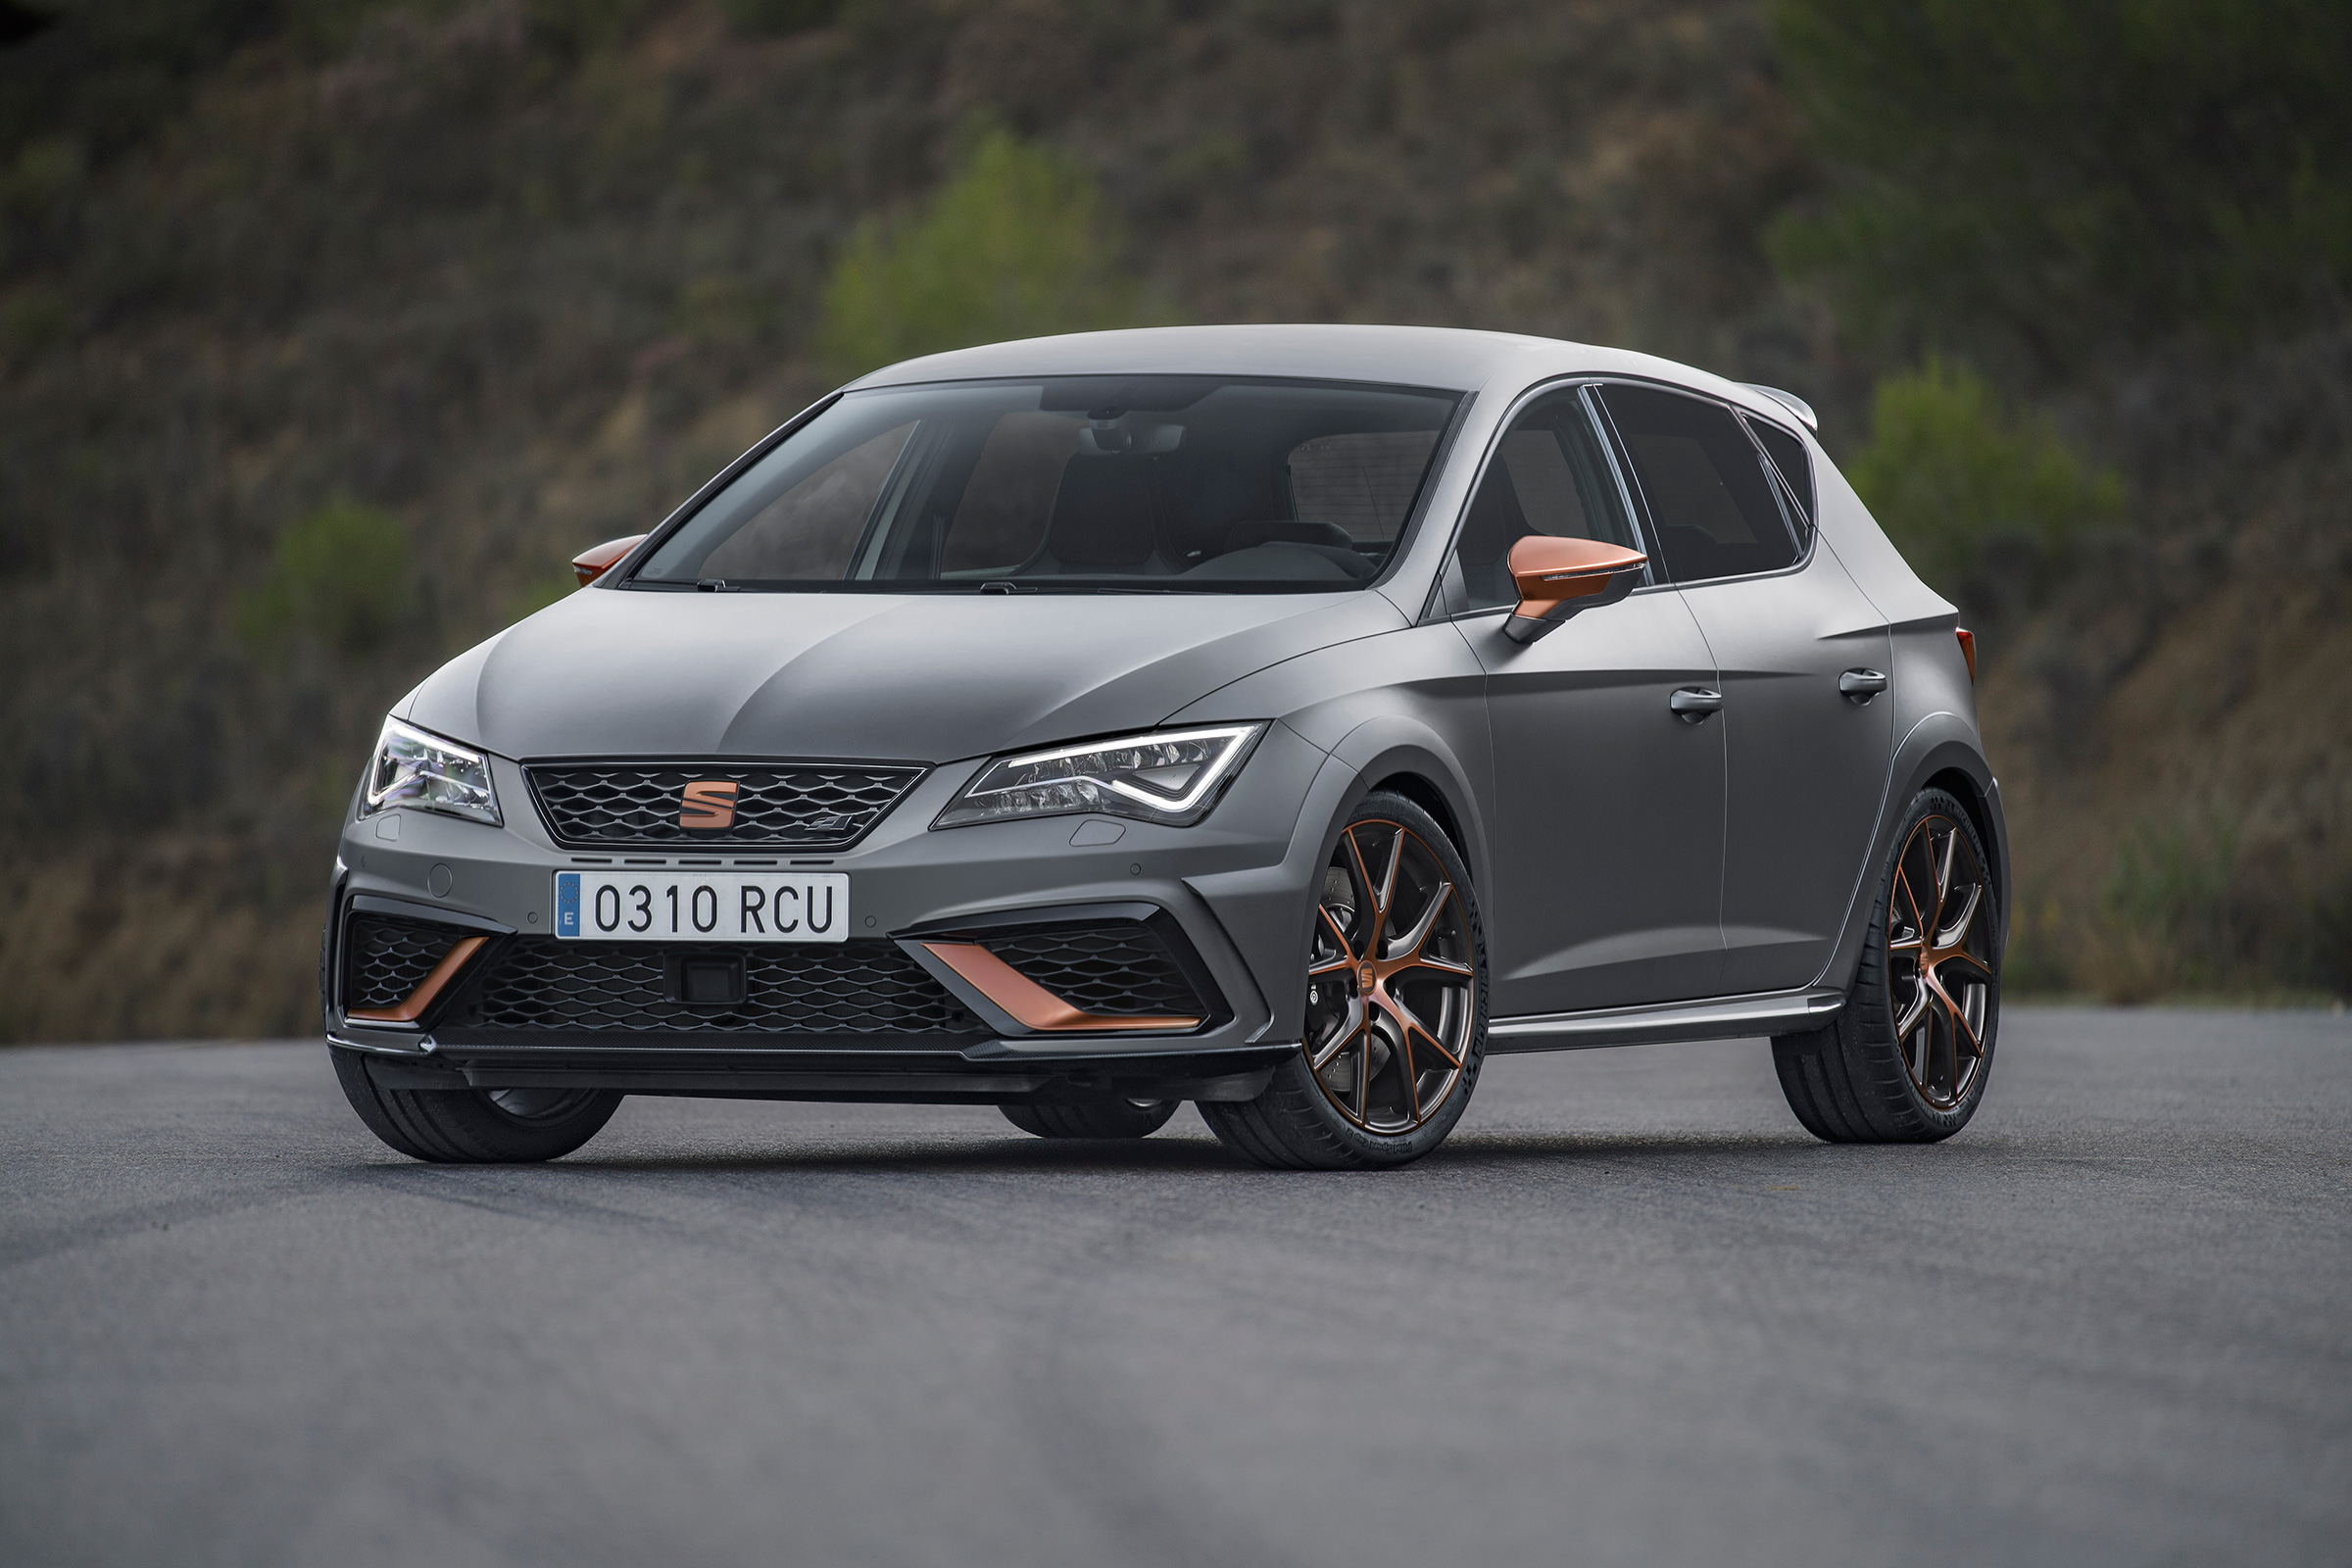 New SEAT Leon Cupra R 2018 review – is it really worth the money?